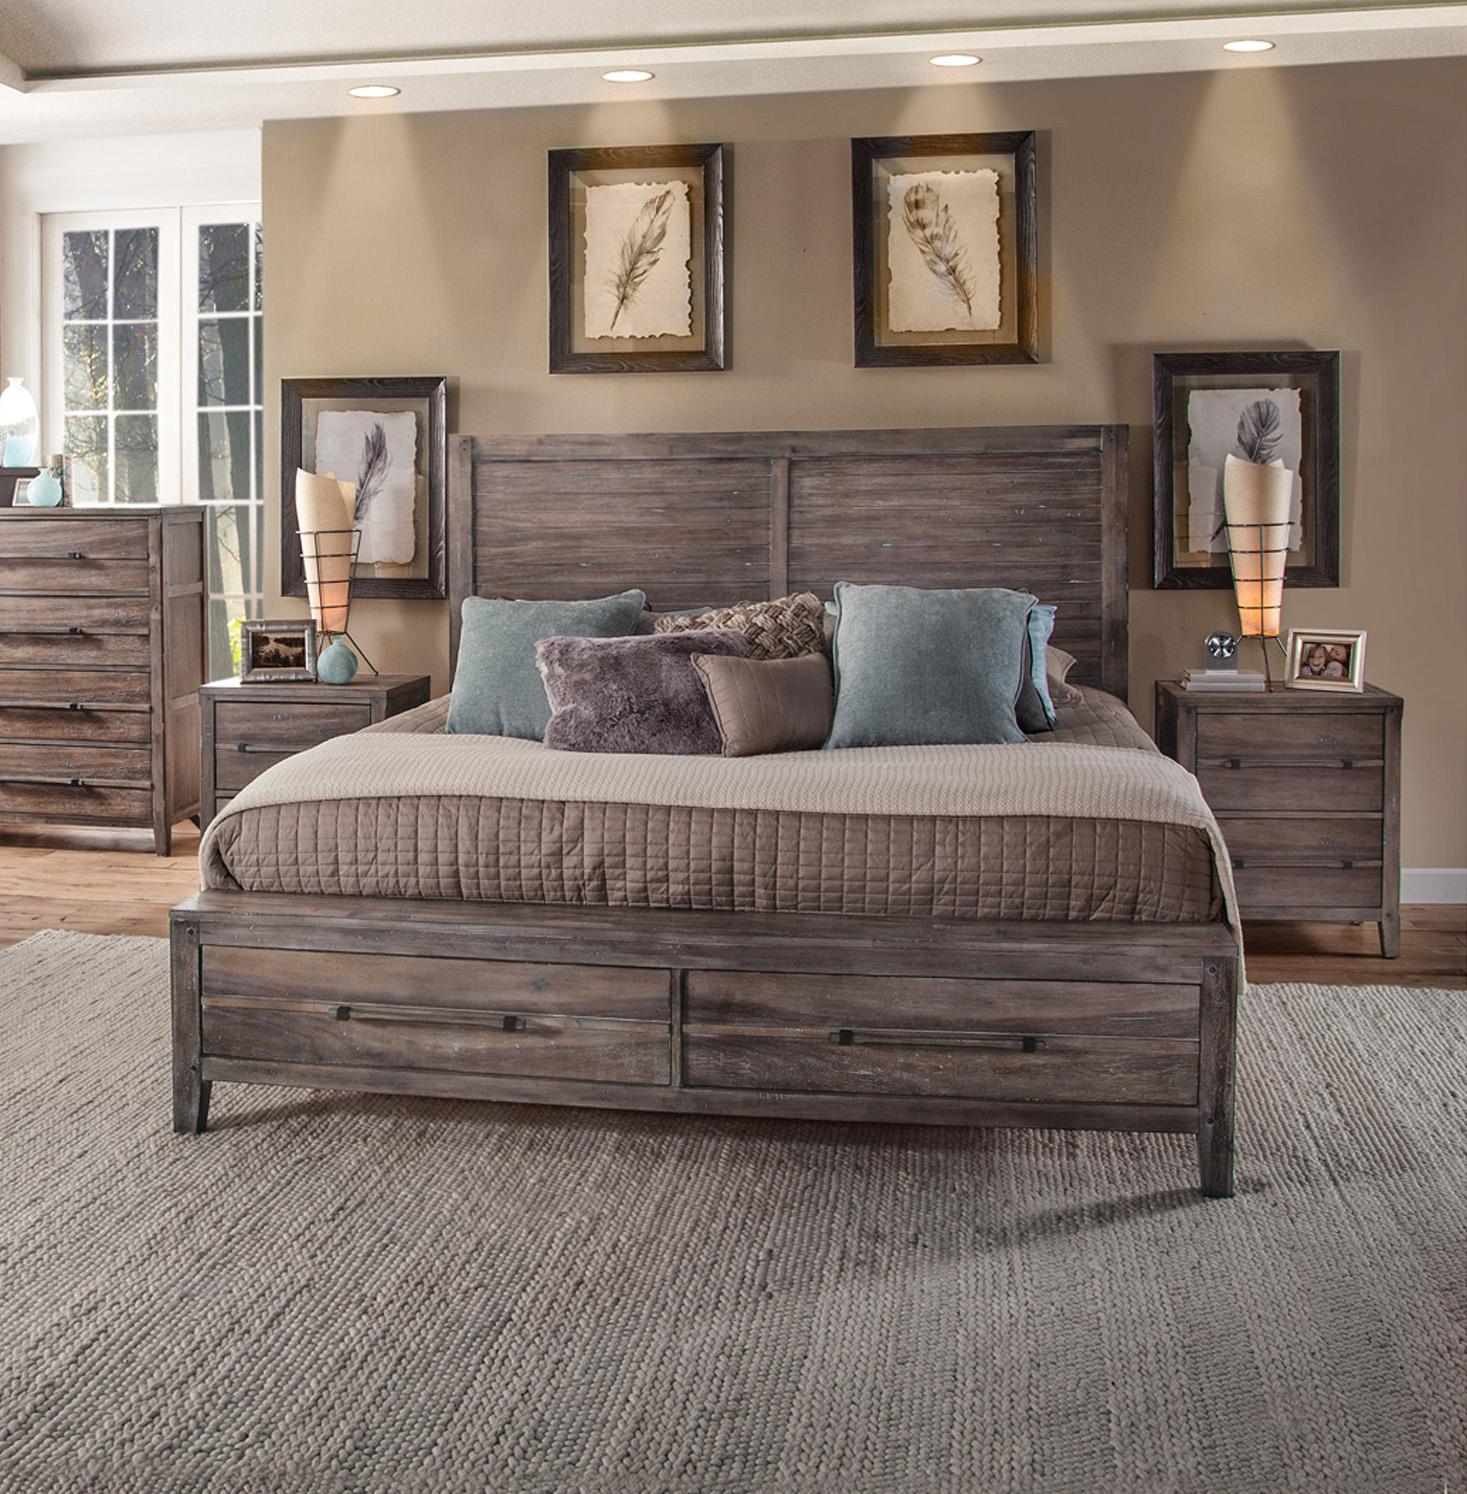 Classic, Traditional Panel Bedroom Set AURORA 2800-50PNST 2800-50PNST-2N-3PC in Driftwood, Gray 